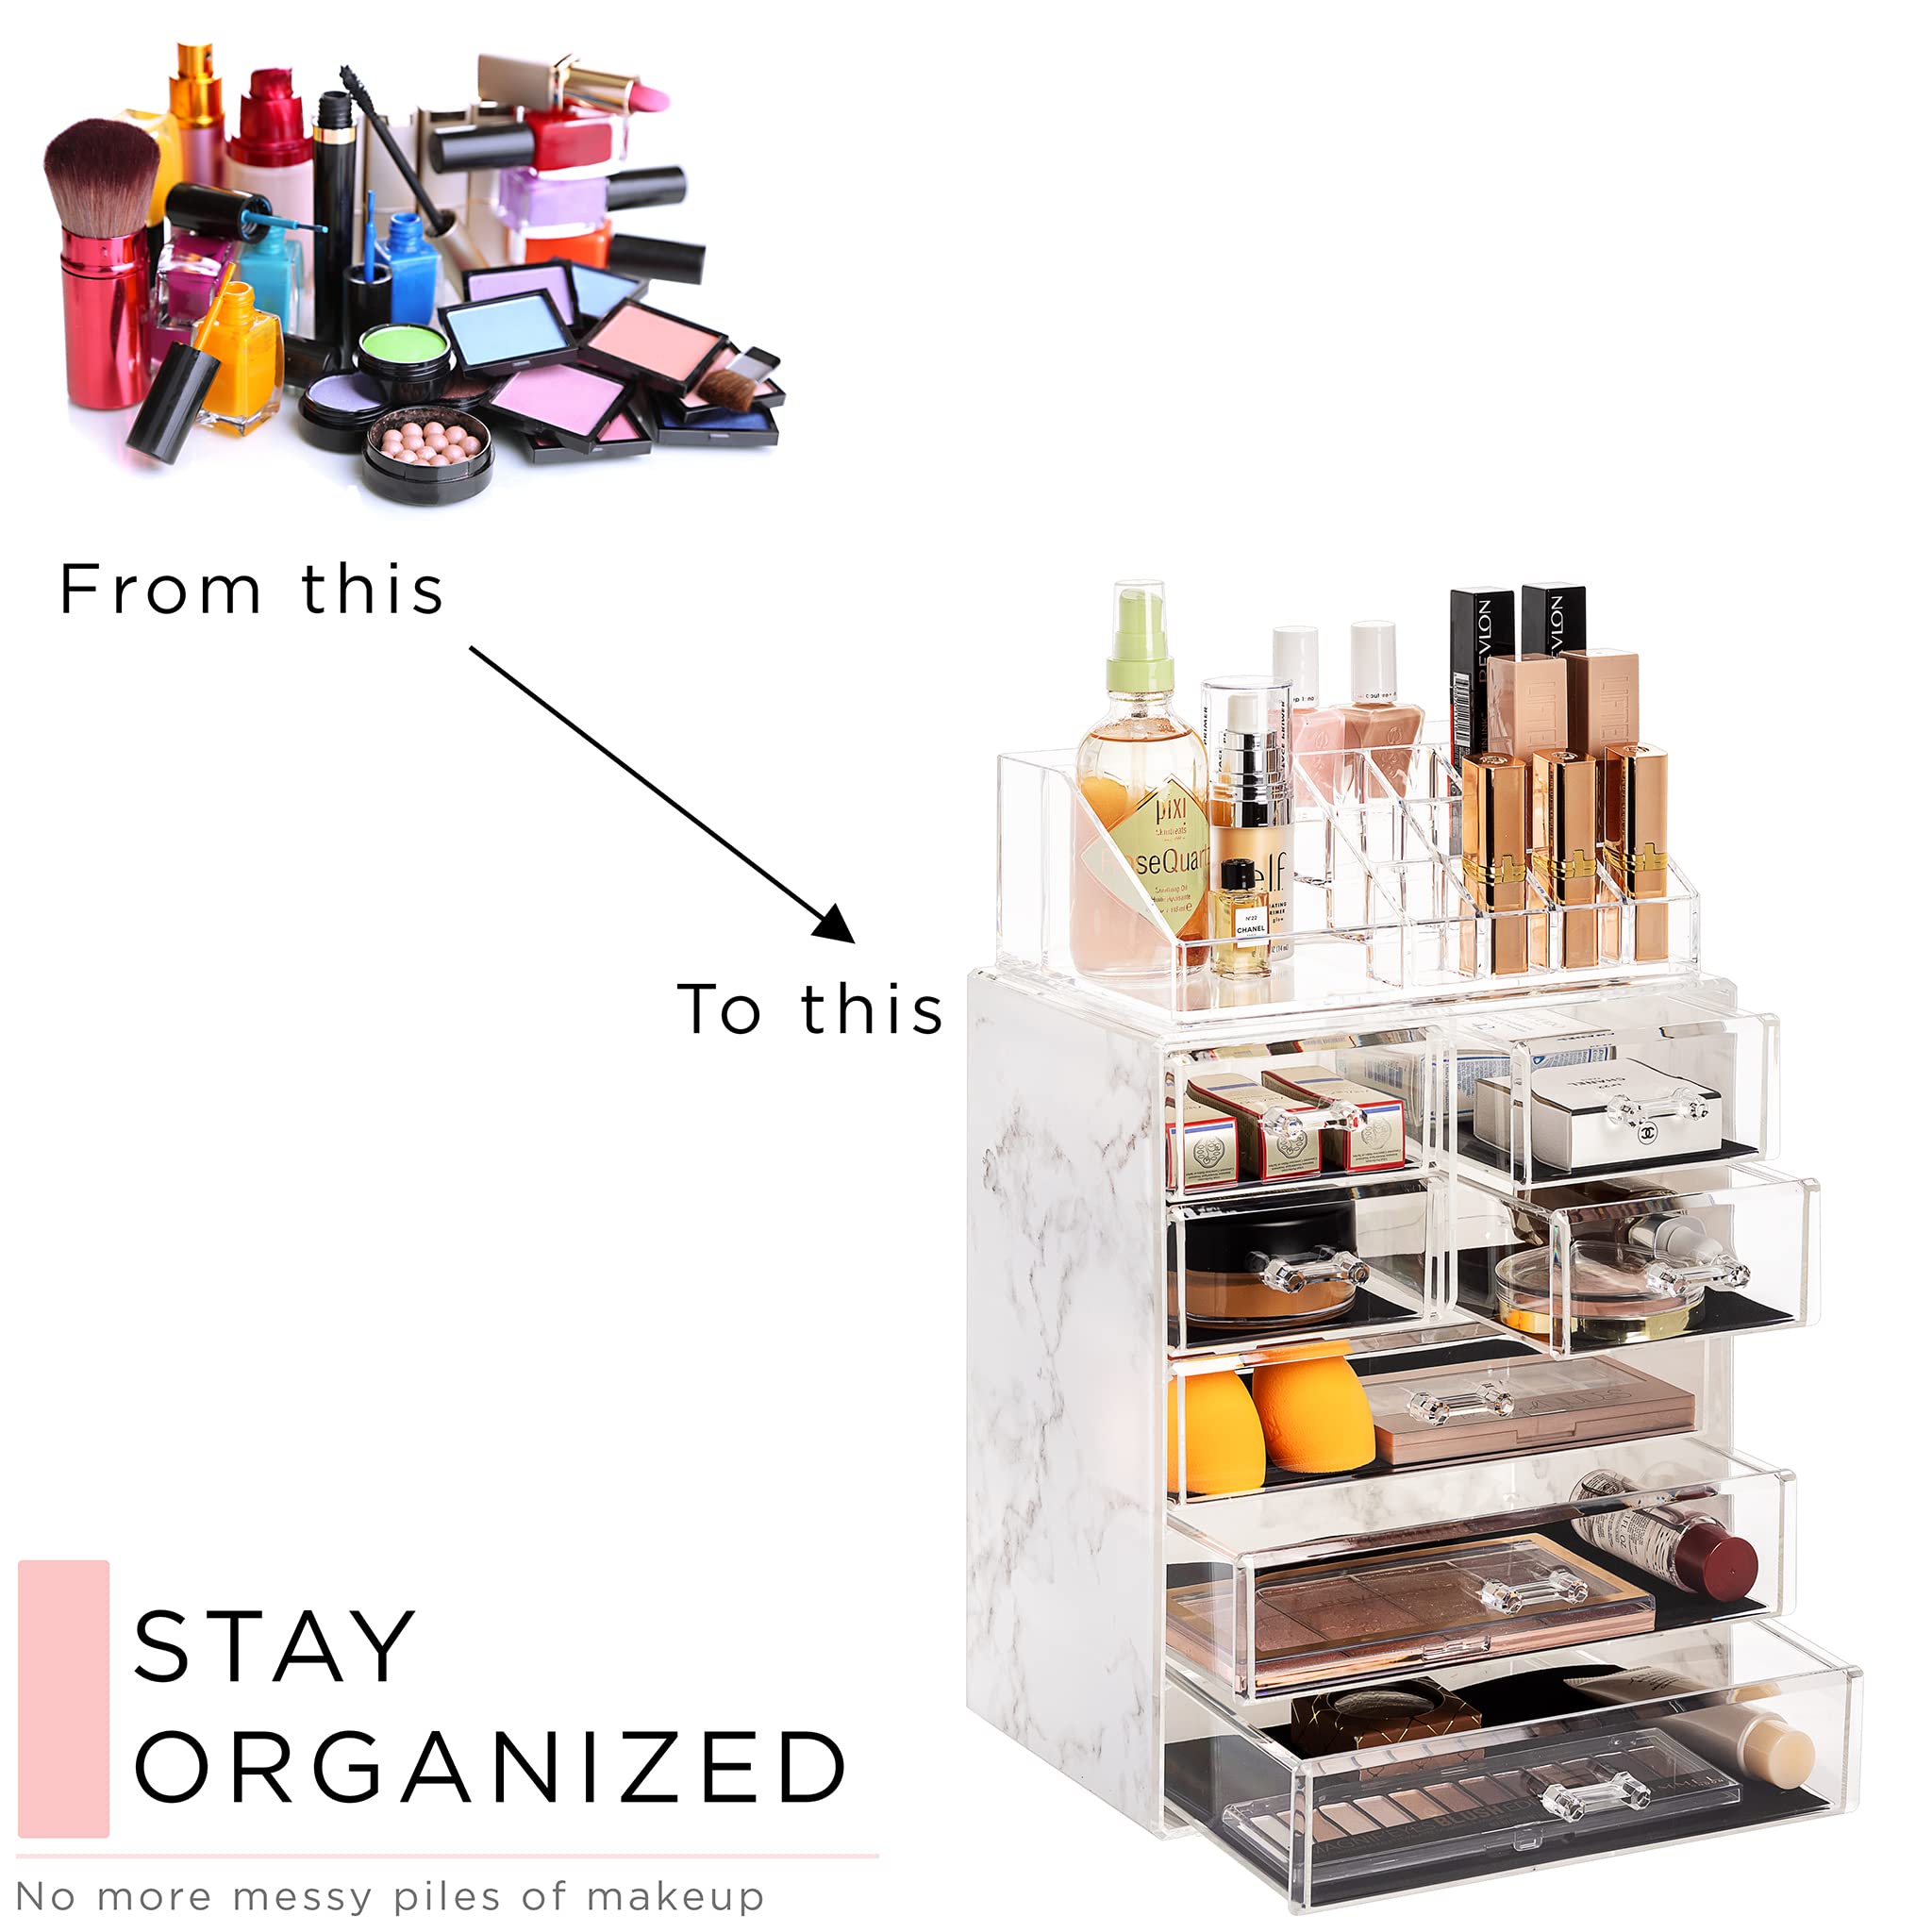 Sorbus Clear Cosmetic Makeup Organizer - Make Up & Jewelry Storage, Case & Display - Spacious Design - Great Holder for Dresser, Bathroom, Vanity & Countertop (3 Large, 4 Small Drawers) [Marble Print]